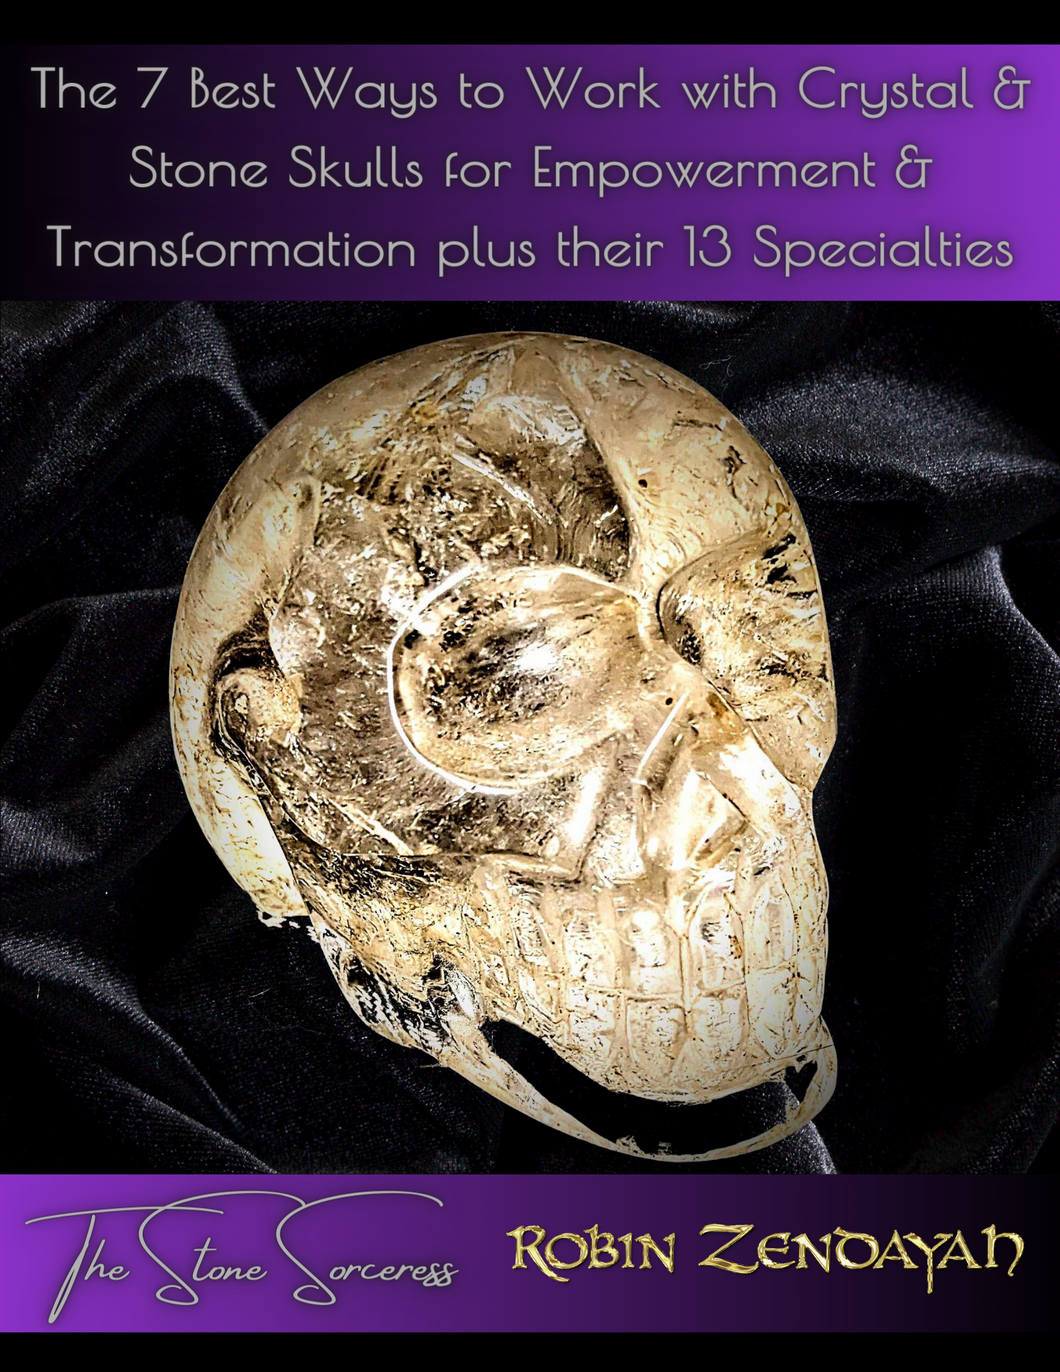 The 7 Best Ways to work with Crystal & Stone Skulls for Empowerment & Transformation plus their 13 Specialties